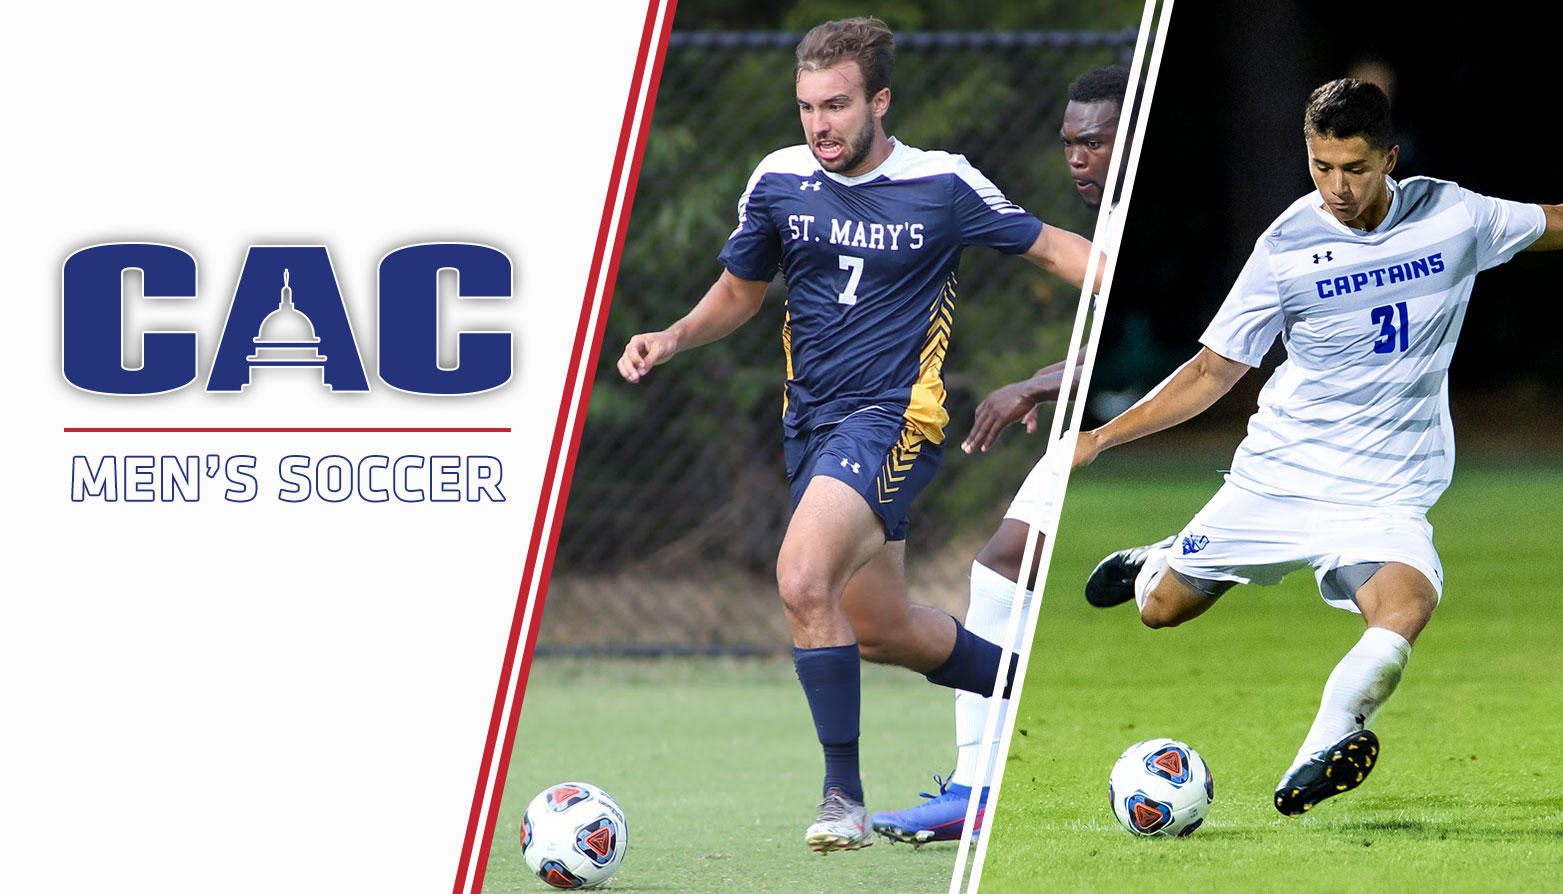 CNU's Cook & St. Mary's McRobie Capture CAC Men's Soccer Weekly Accolades